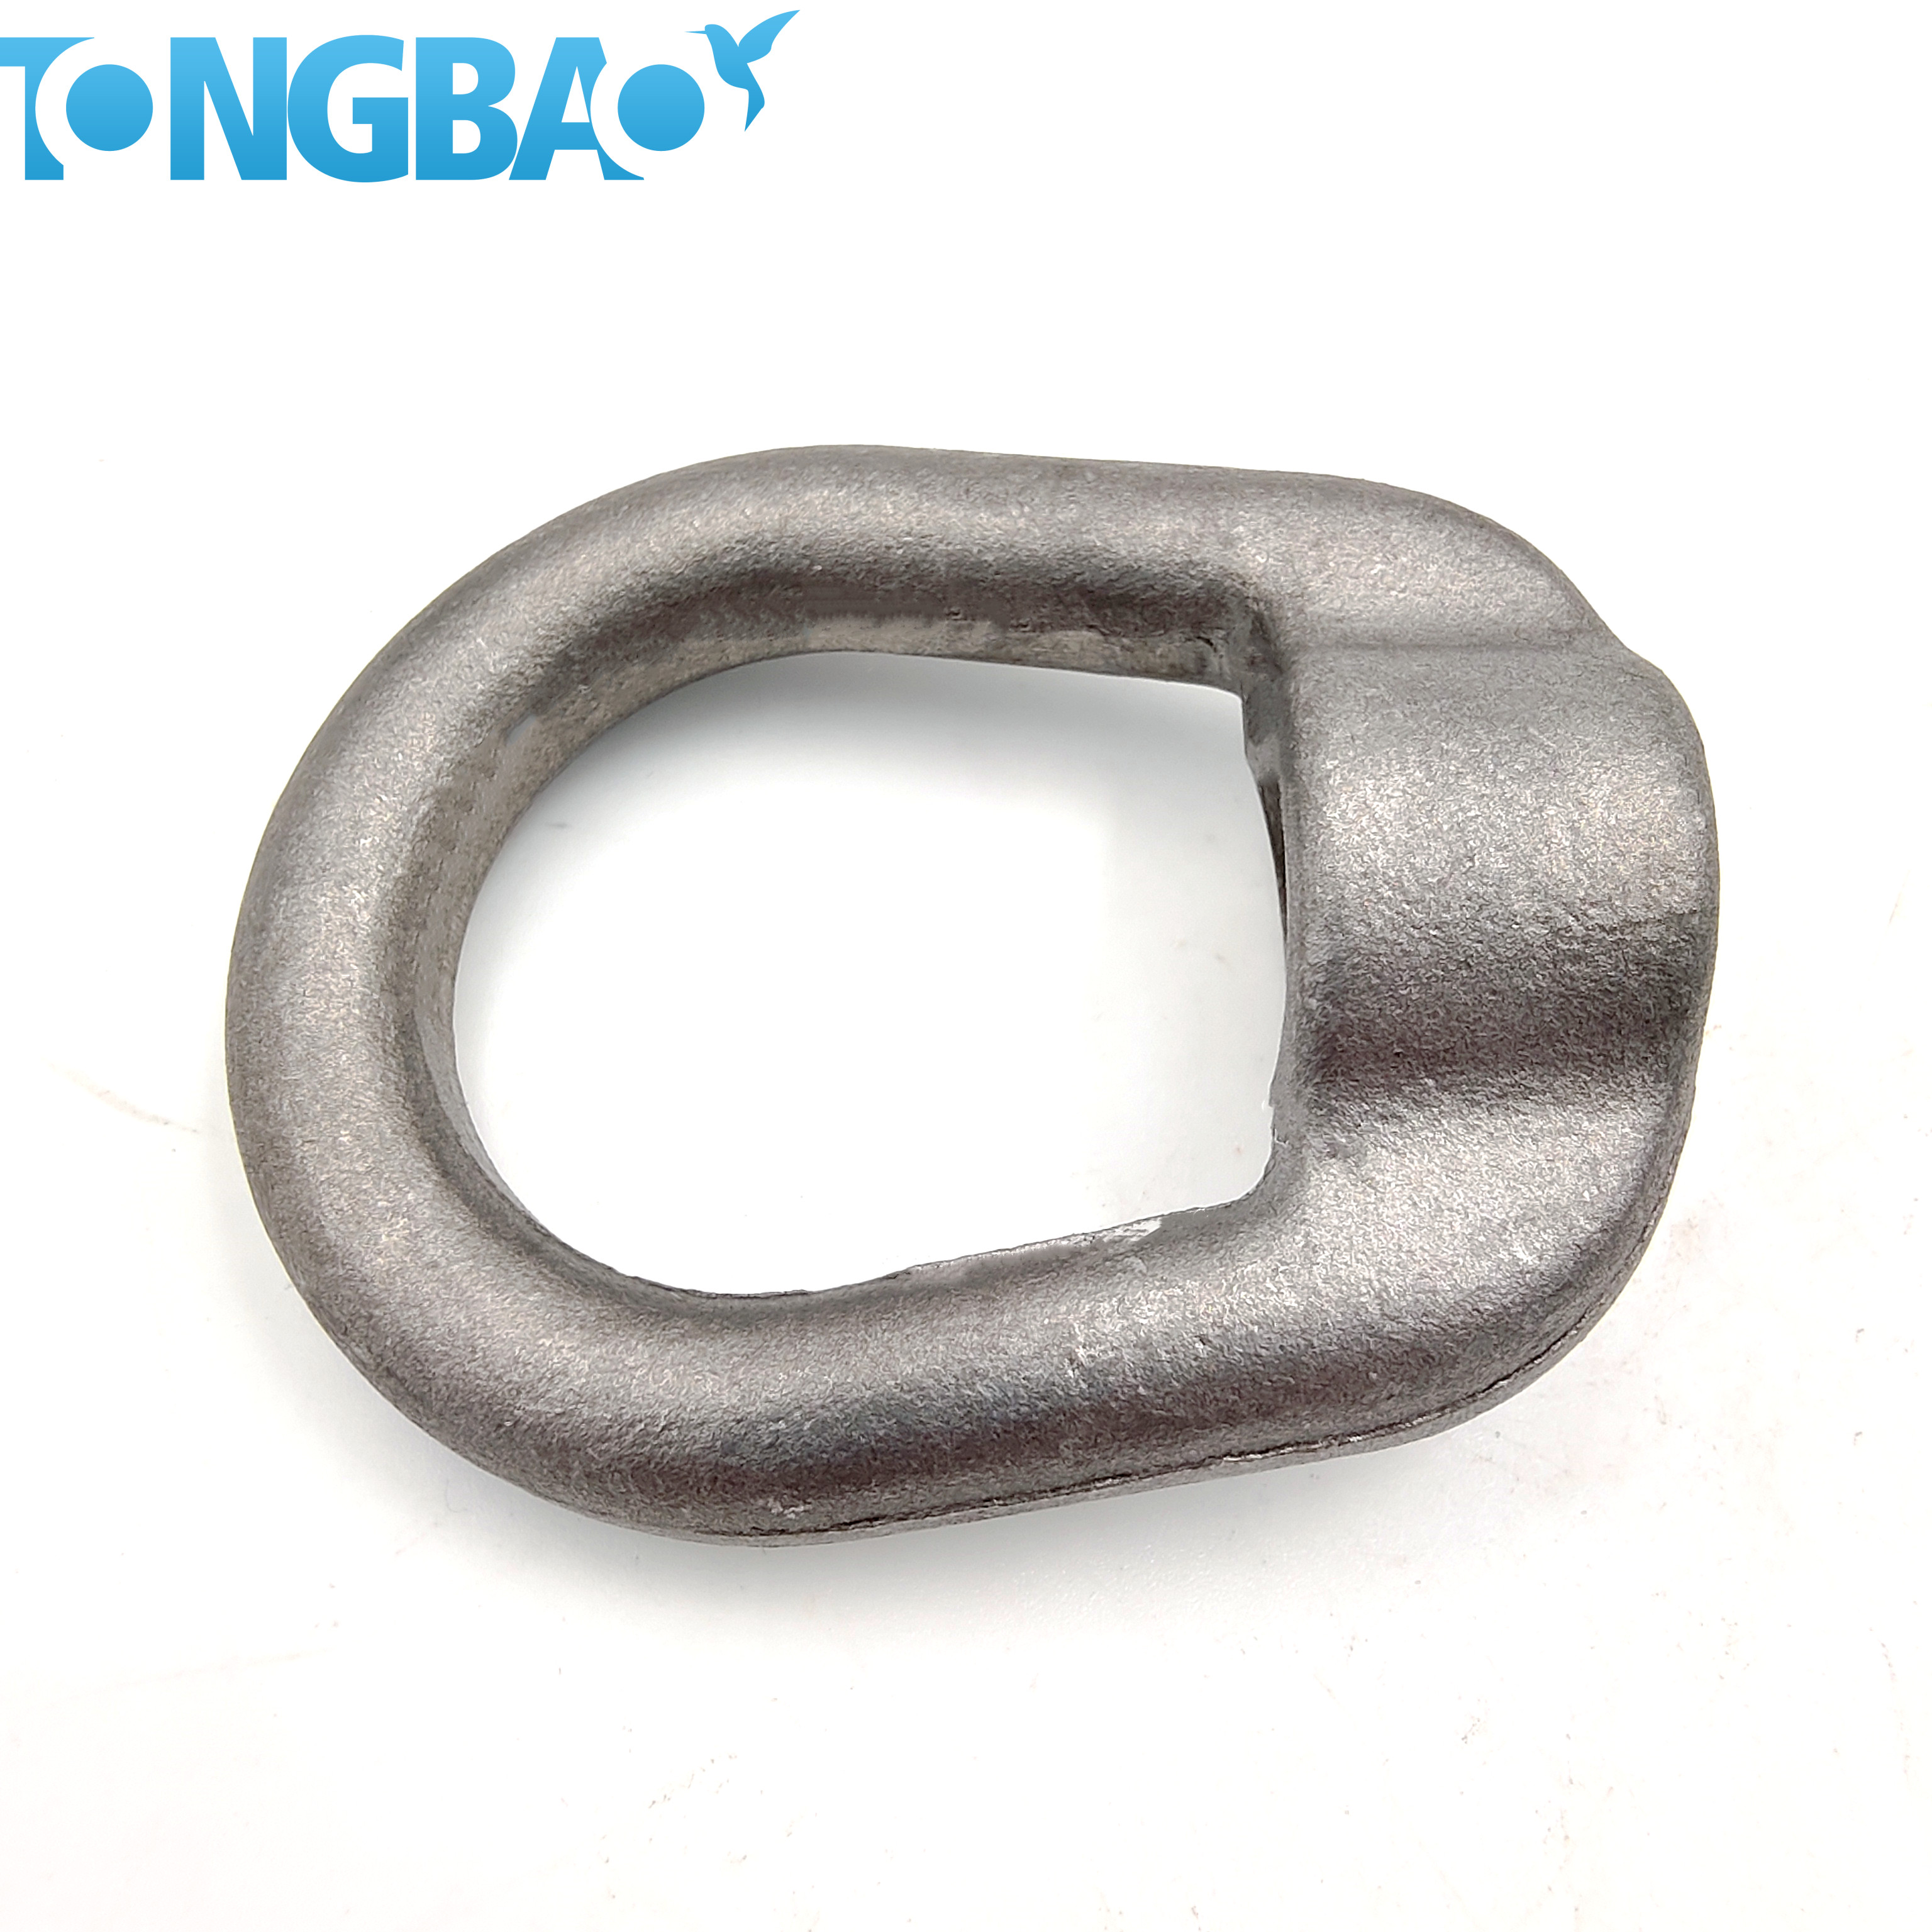 Forged Eye/ Yoke for Lifting Machinery and Equipment